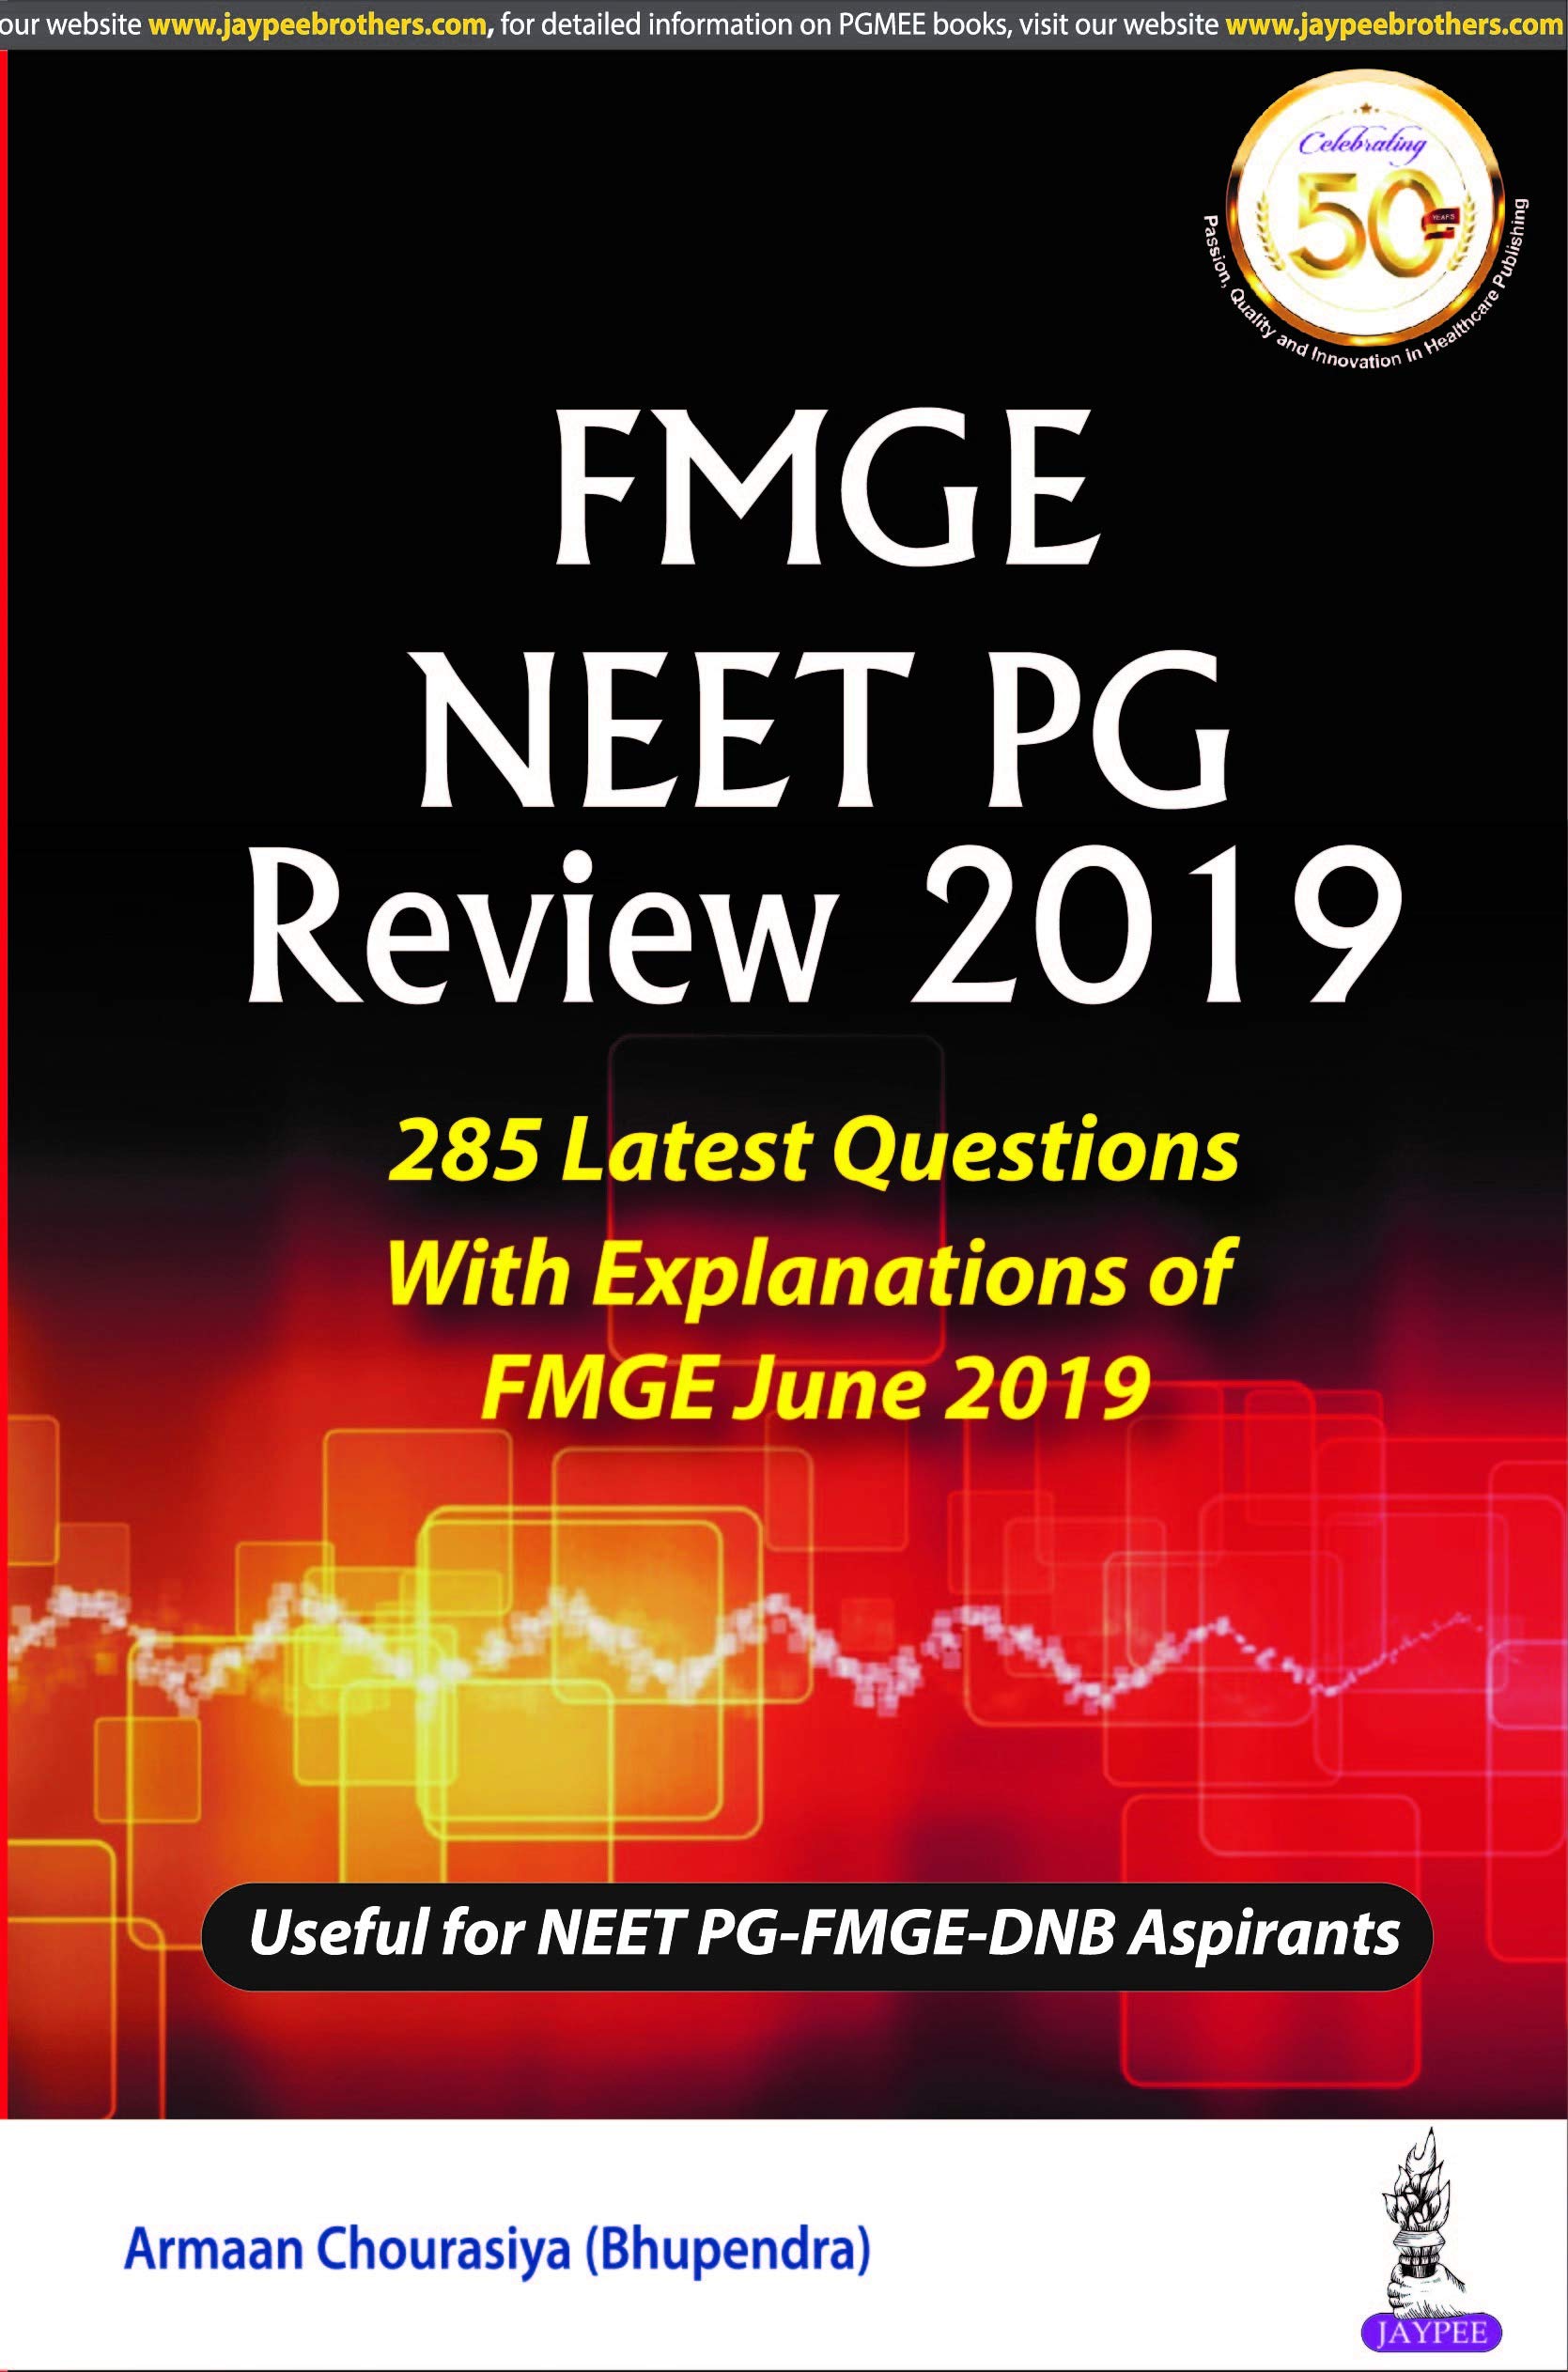 Fmge Neet Pg Review 2019